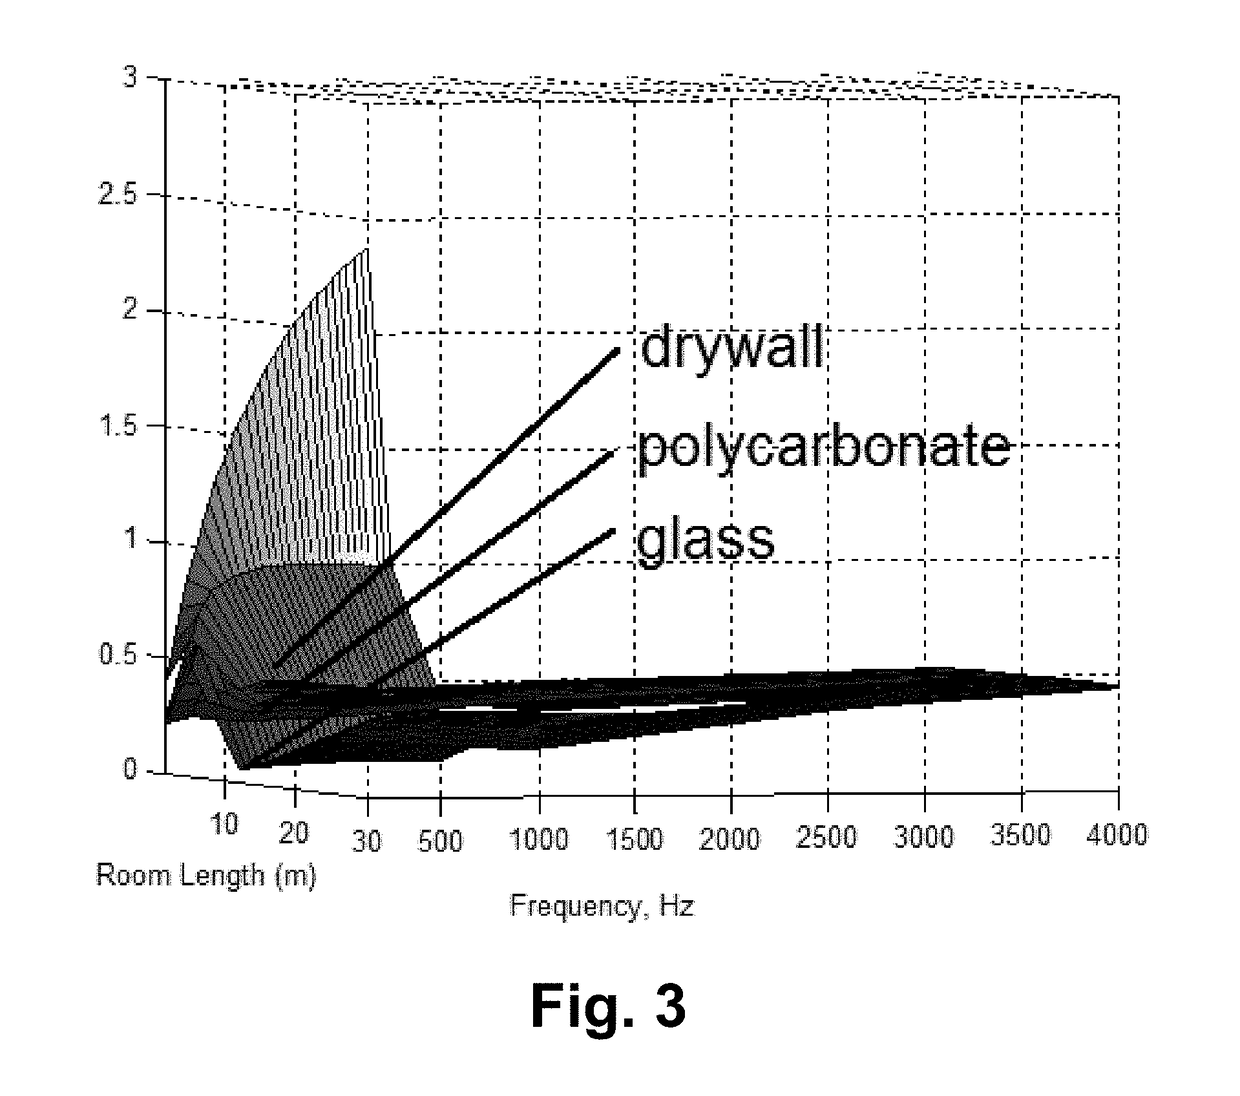 Acoustic wall assembly having double-wall configuration and passive noise-disruptive properties, and/or method of making and/or using the same